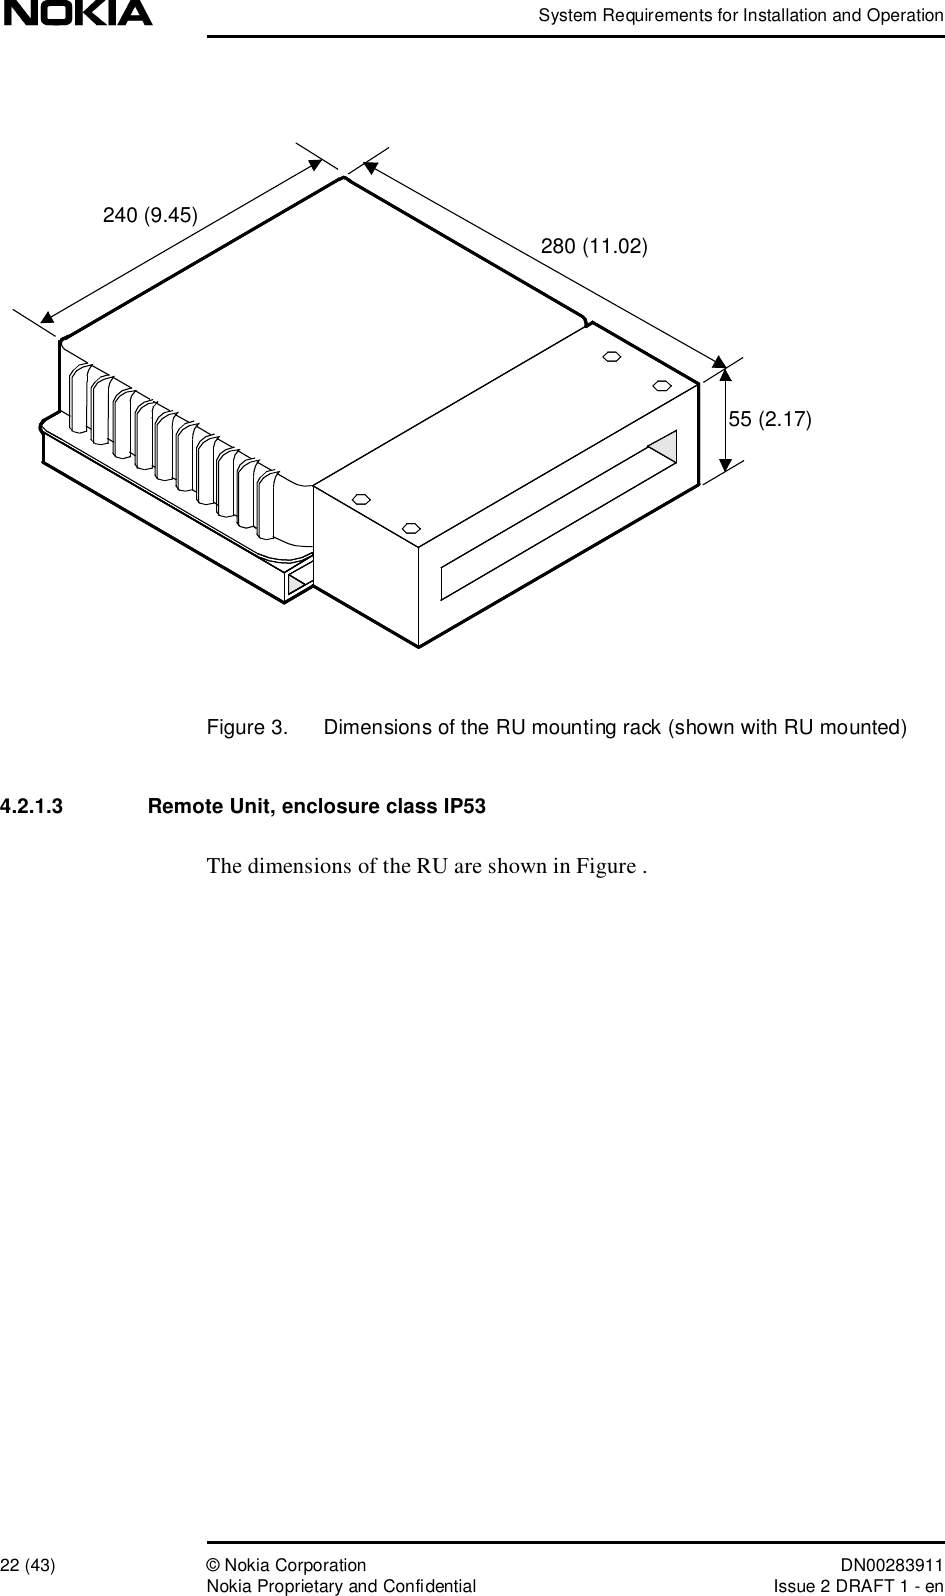 System Requirements for Installation and Operation22 (43)© Nokia Corporation DN00283911Nokia Proprietary and ConfidentialIssue 2 DRAFT 1 - enFigure 3.  Dimensions of the RU mounting rack (shown with RU mounted)4.2.1.3  Remote Unit, enclosure class IP53The dimensions of the RU are shown in Figure . 240 (9.45)280 (11.02)55 (2.17)